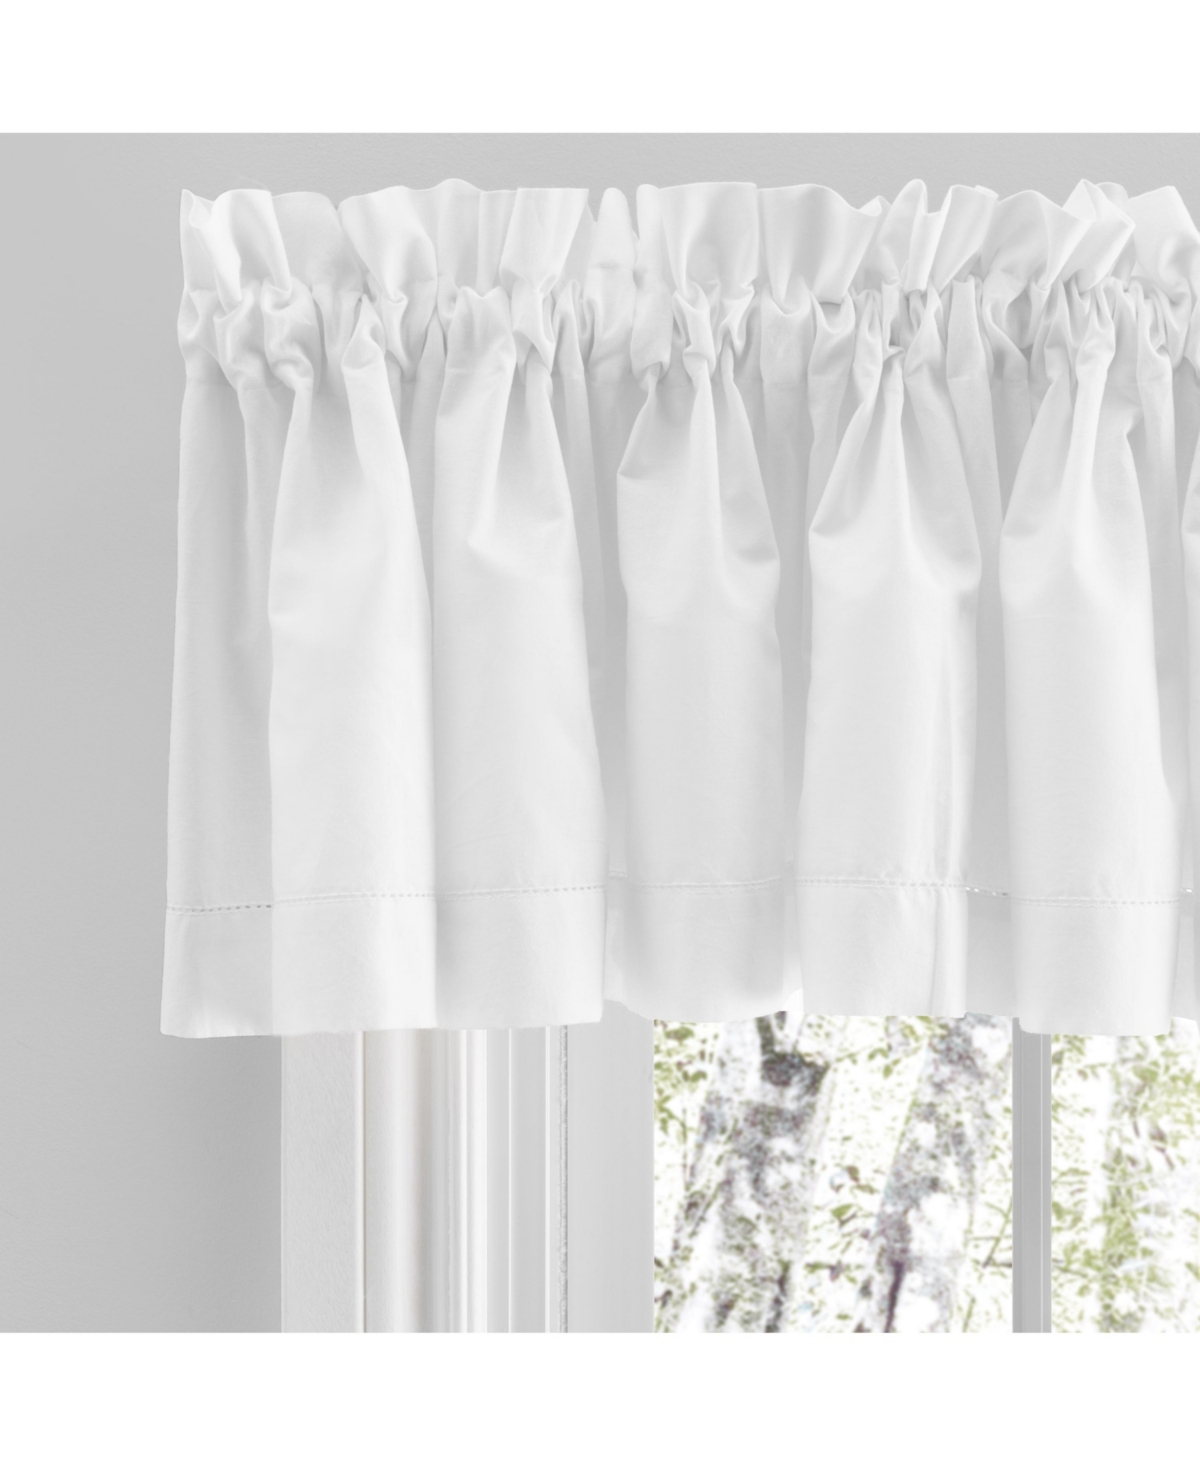 Simplicity Tailored Valance Curtain 80"W x 13"L - White